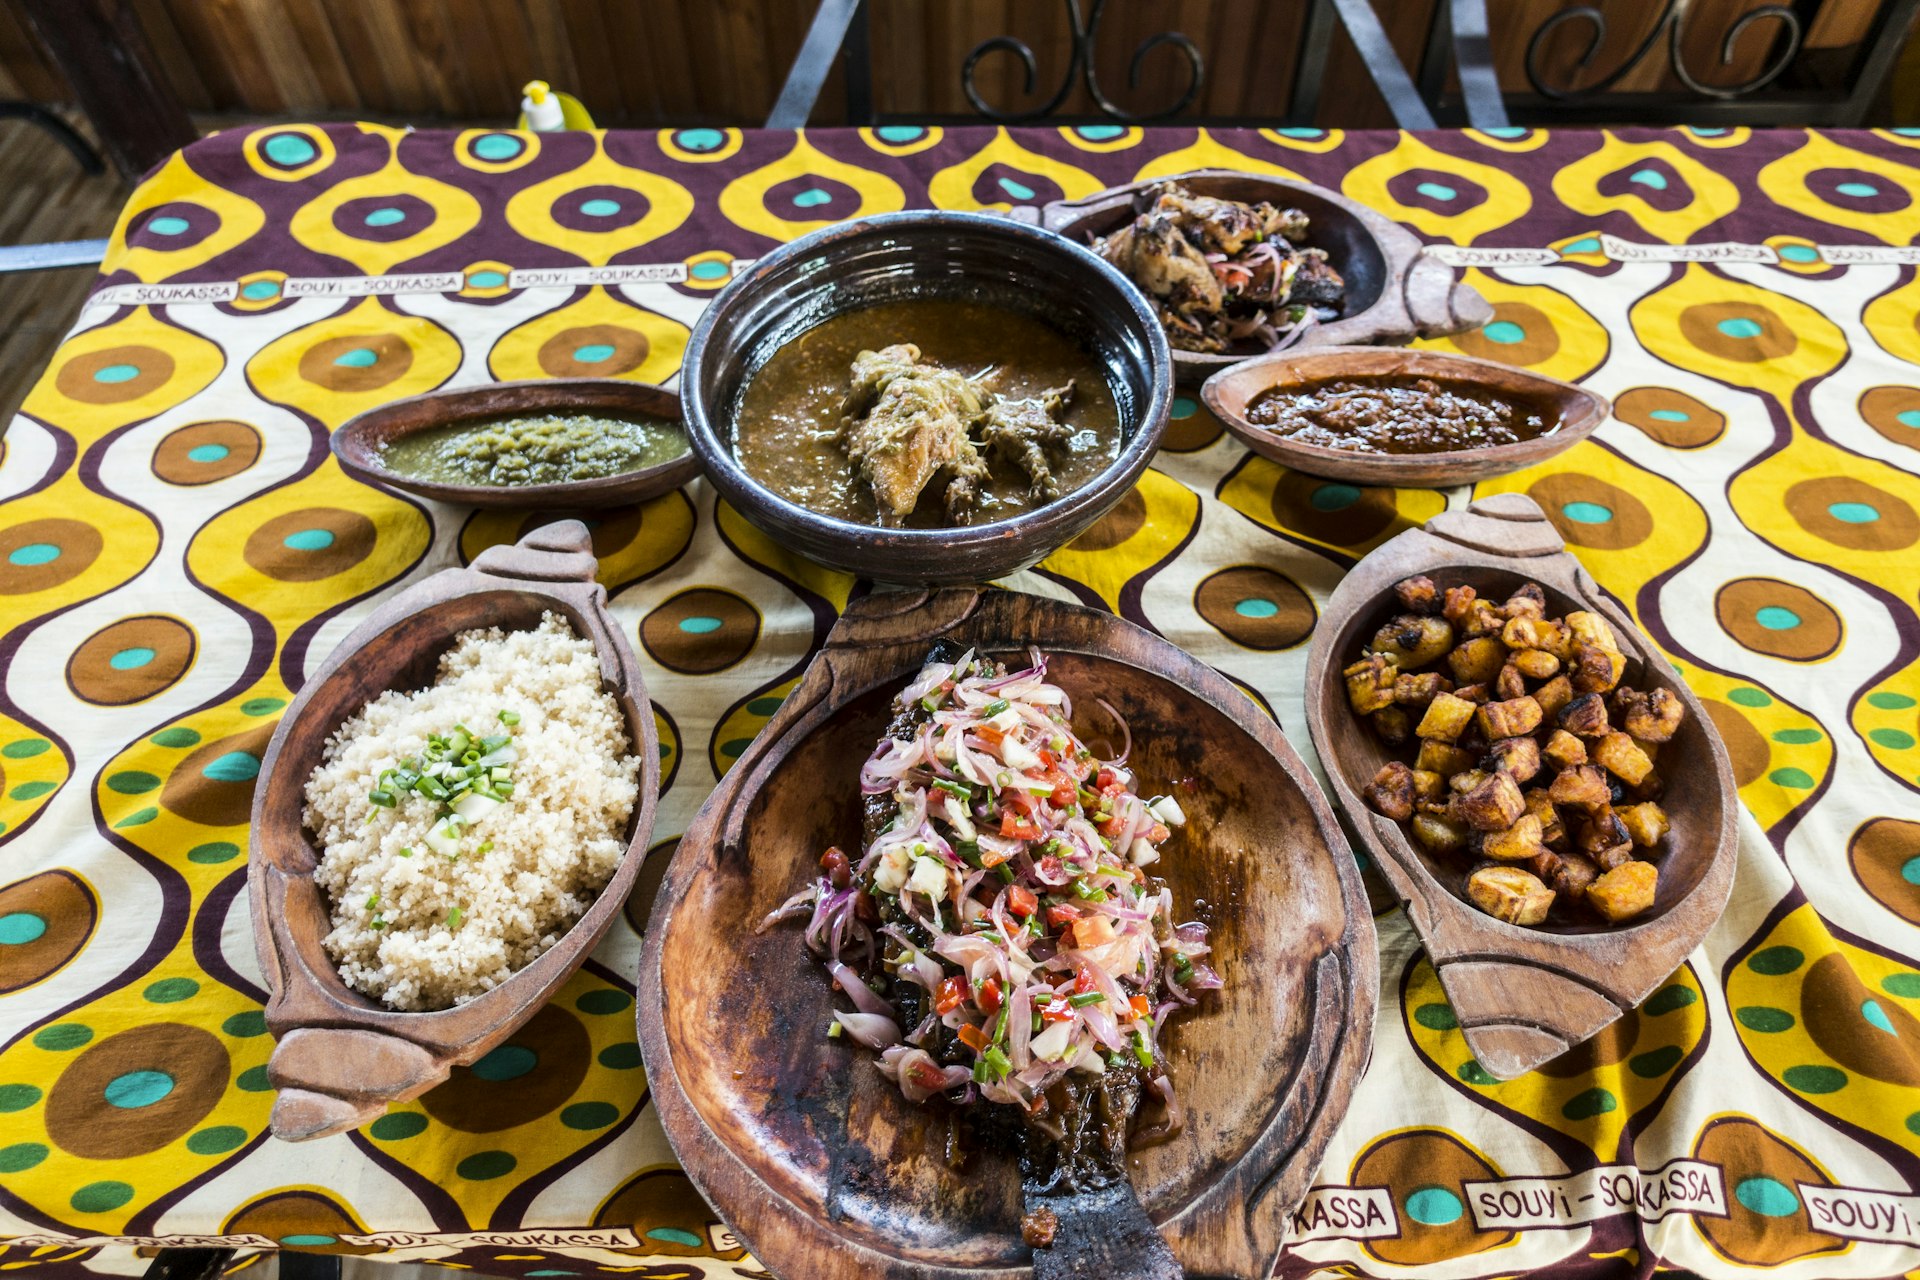 Separate Ghanaian dishes laid out on a yellow-and-brown table cloth